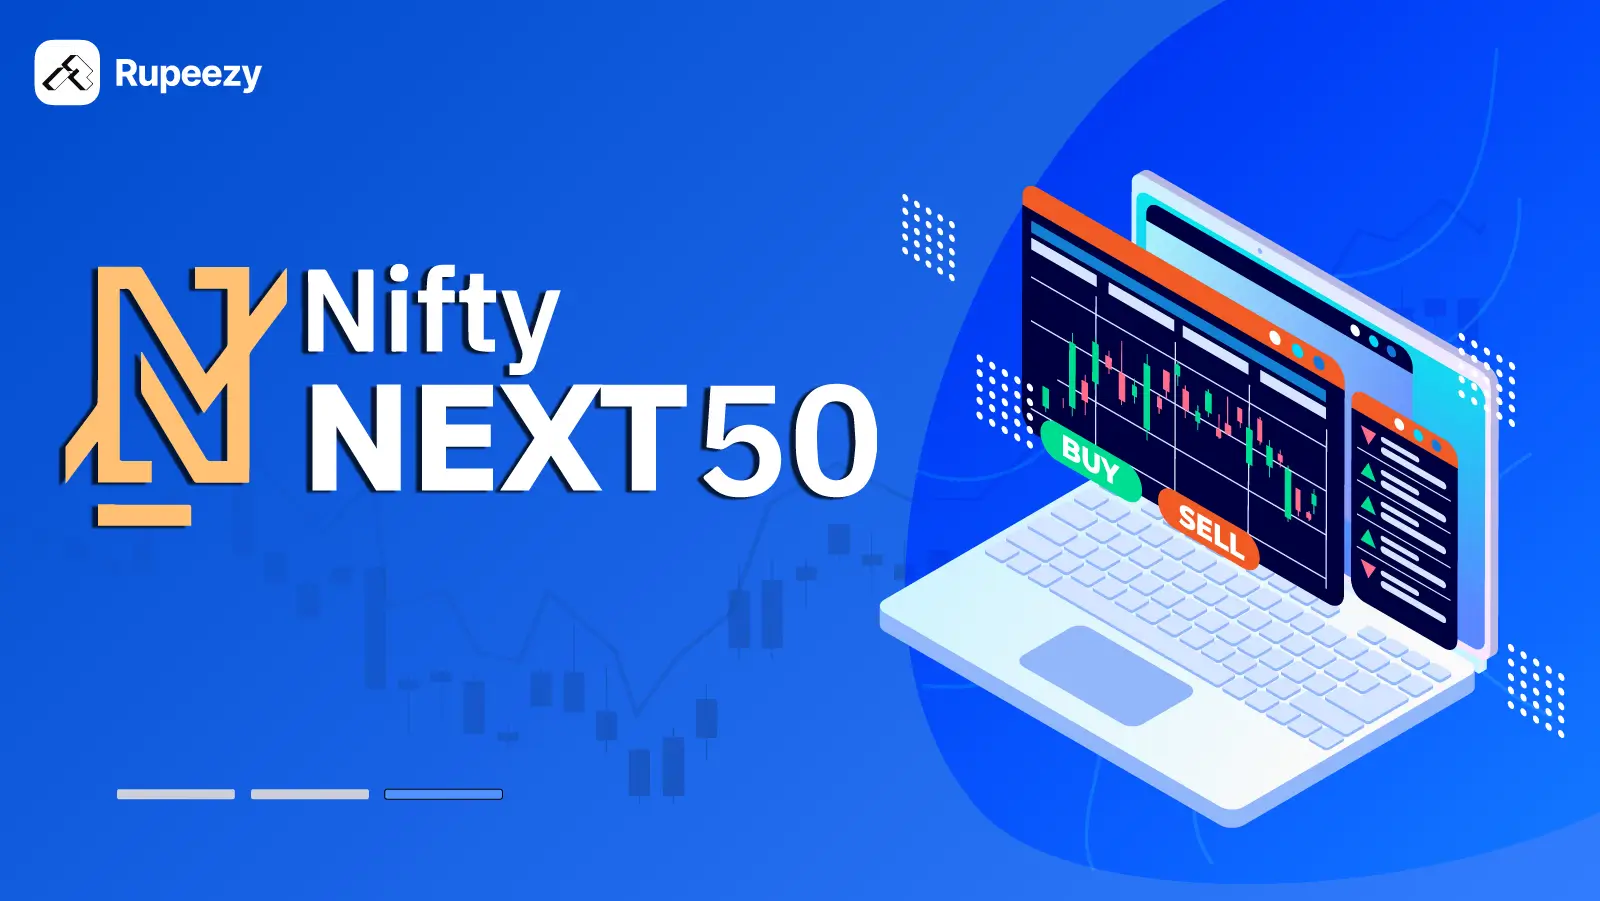 What is Nifty Next 50?